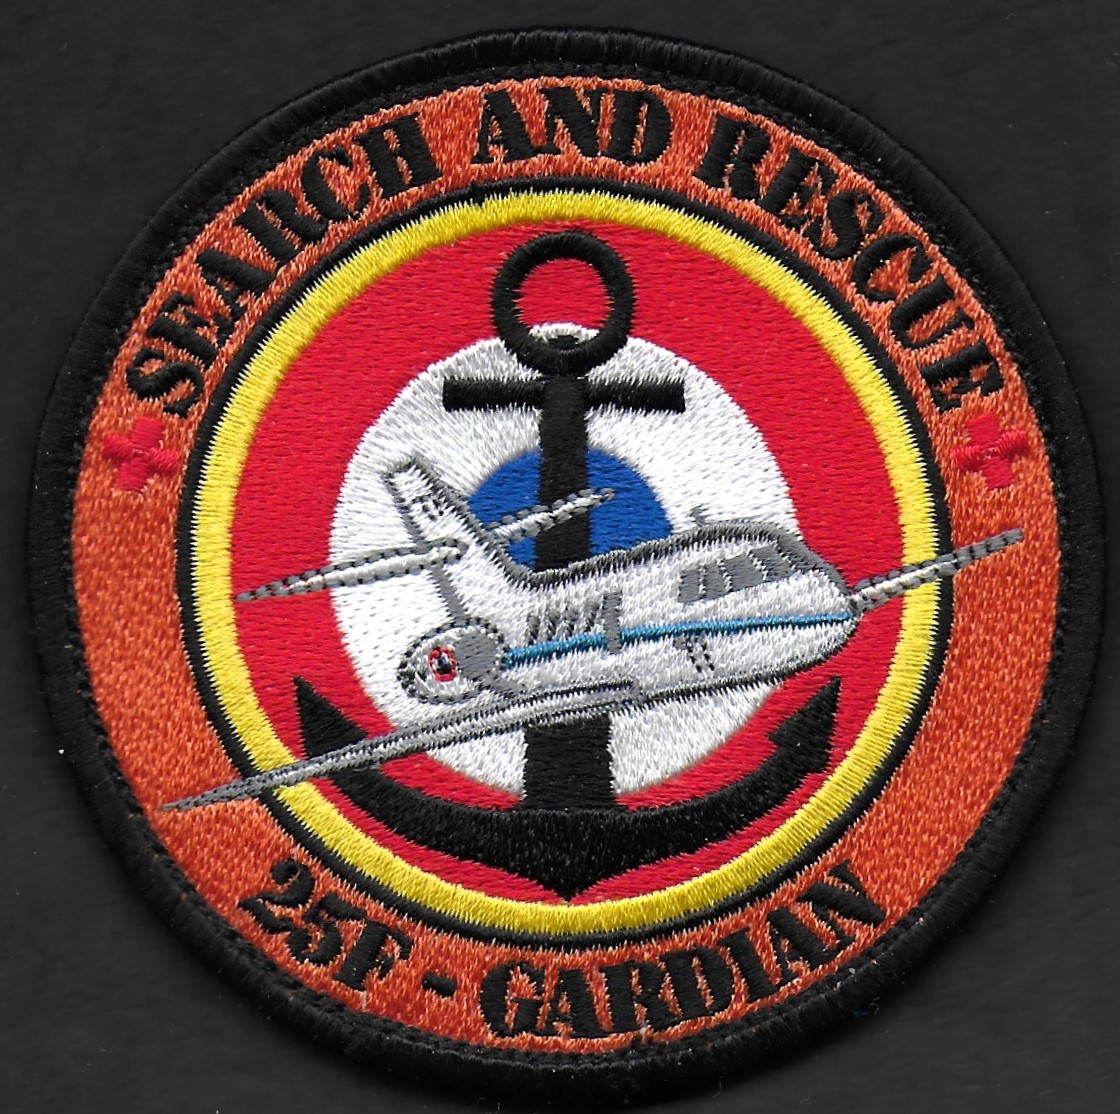 25 F - Search and Rescue - Gardian